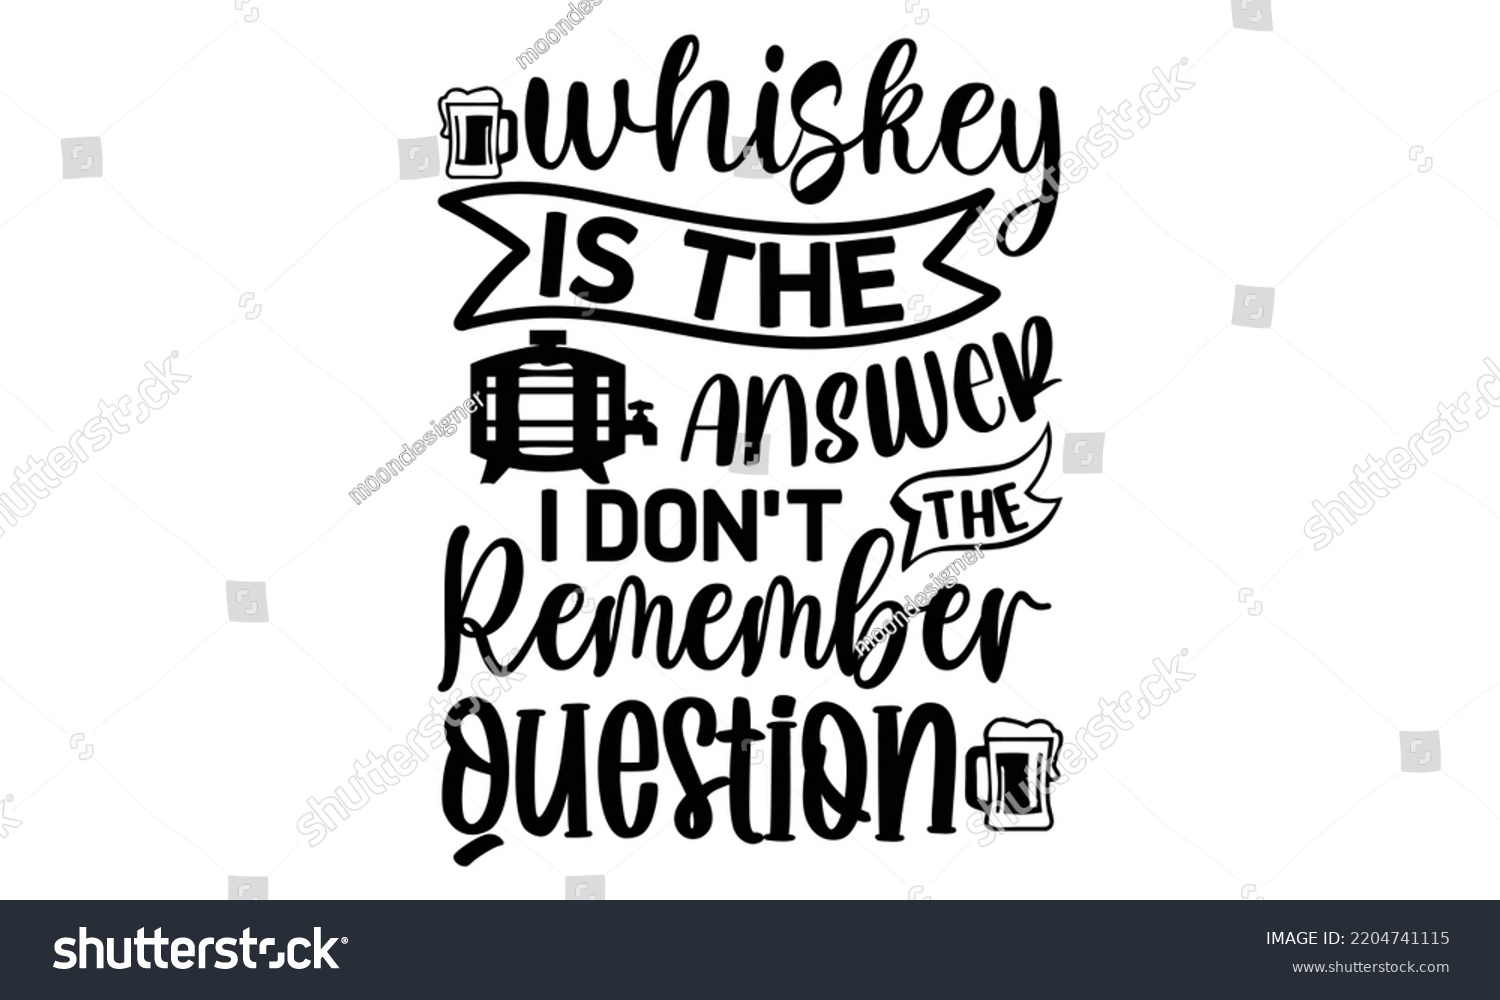 SVG of whiskey is the answer i don't remember the question - Alcohol svg t shirt design, Girl Beer Design, Prost, Pretzels and Beer, Calligraphy graphic design, SVG Files for Cutting Cricut and Silhouette, E svg